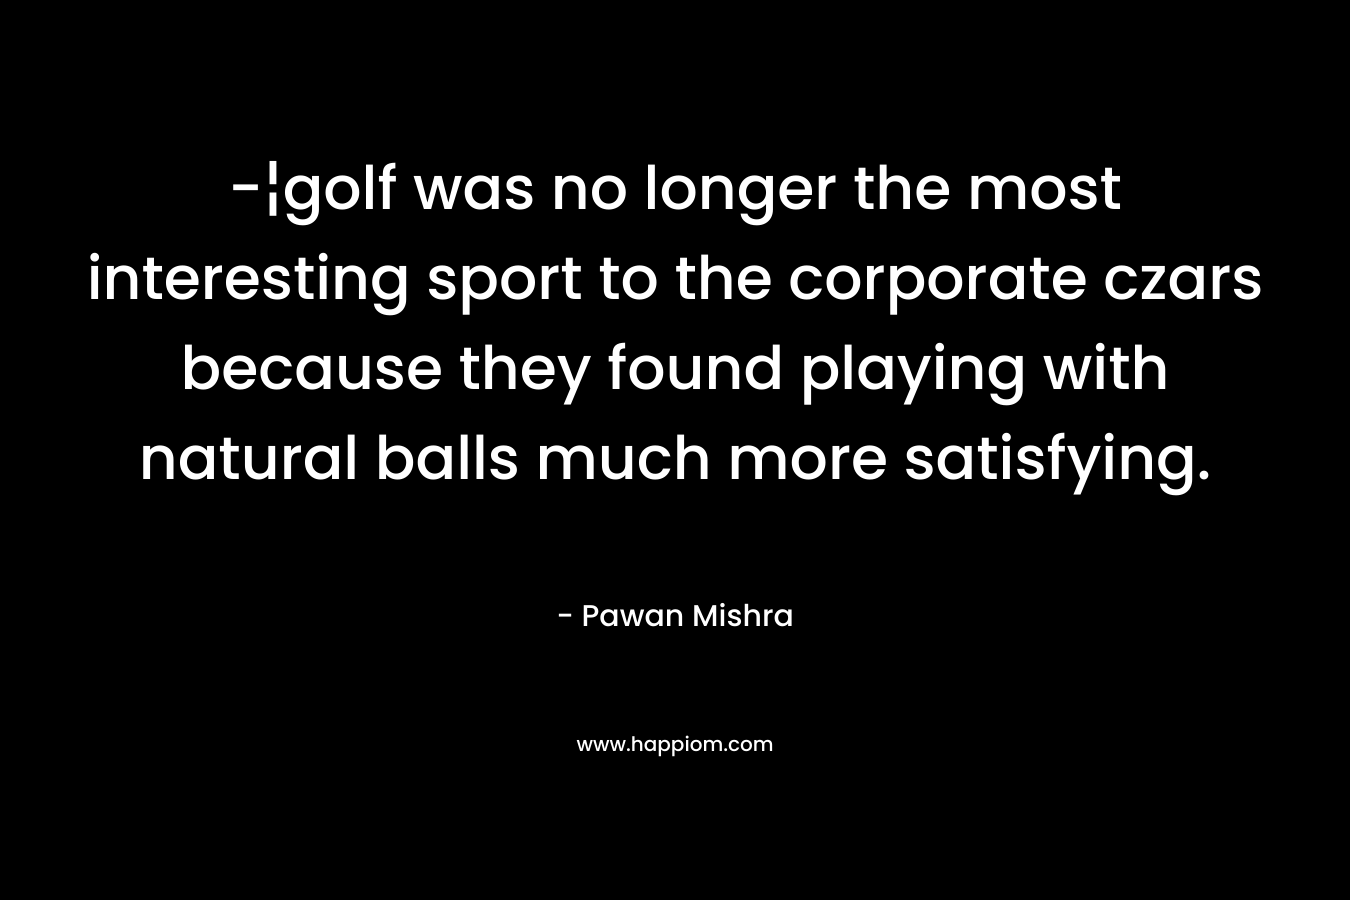 -¦golf was no longer the most interesting sport to the corporate czars because they found playing with natural balls much more satisfying.